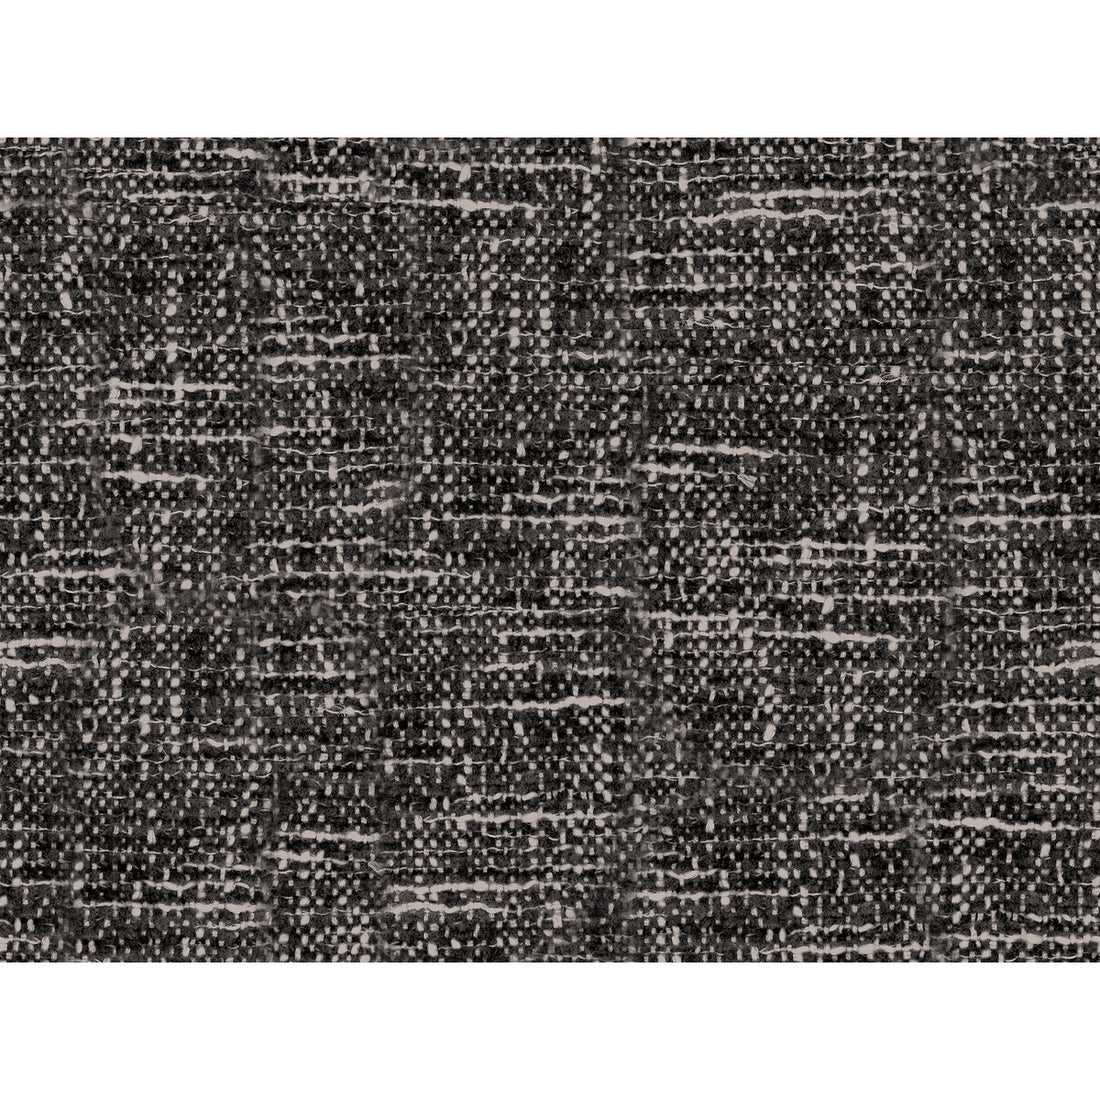 Tinge fabric in onyx color - pattern GWF-3720.8.0 - by Lee Jofa Modern in the Kelly Wearstler Textures collection